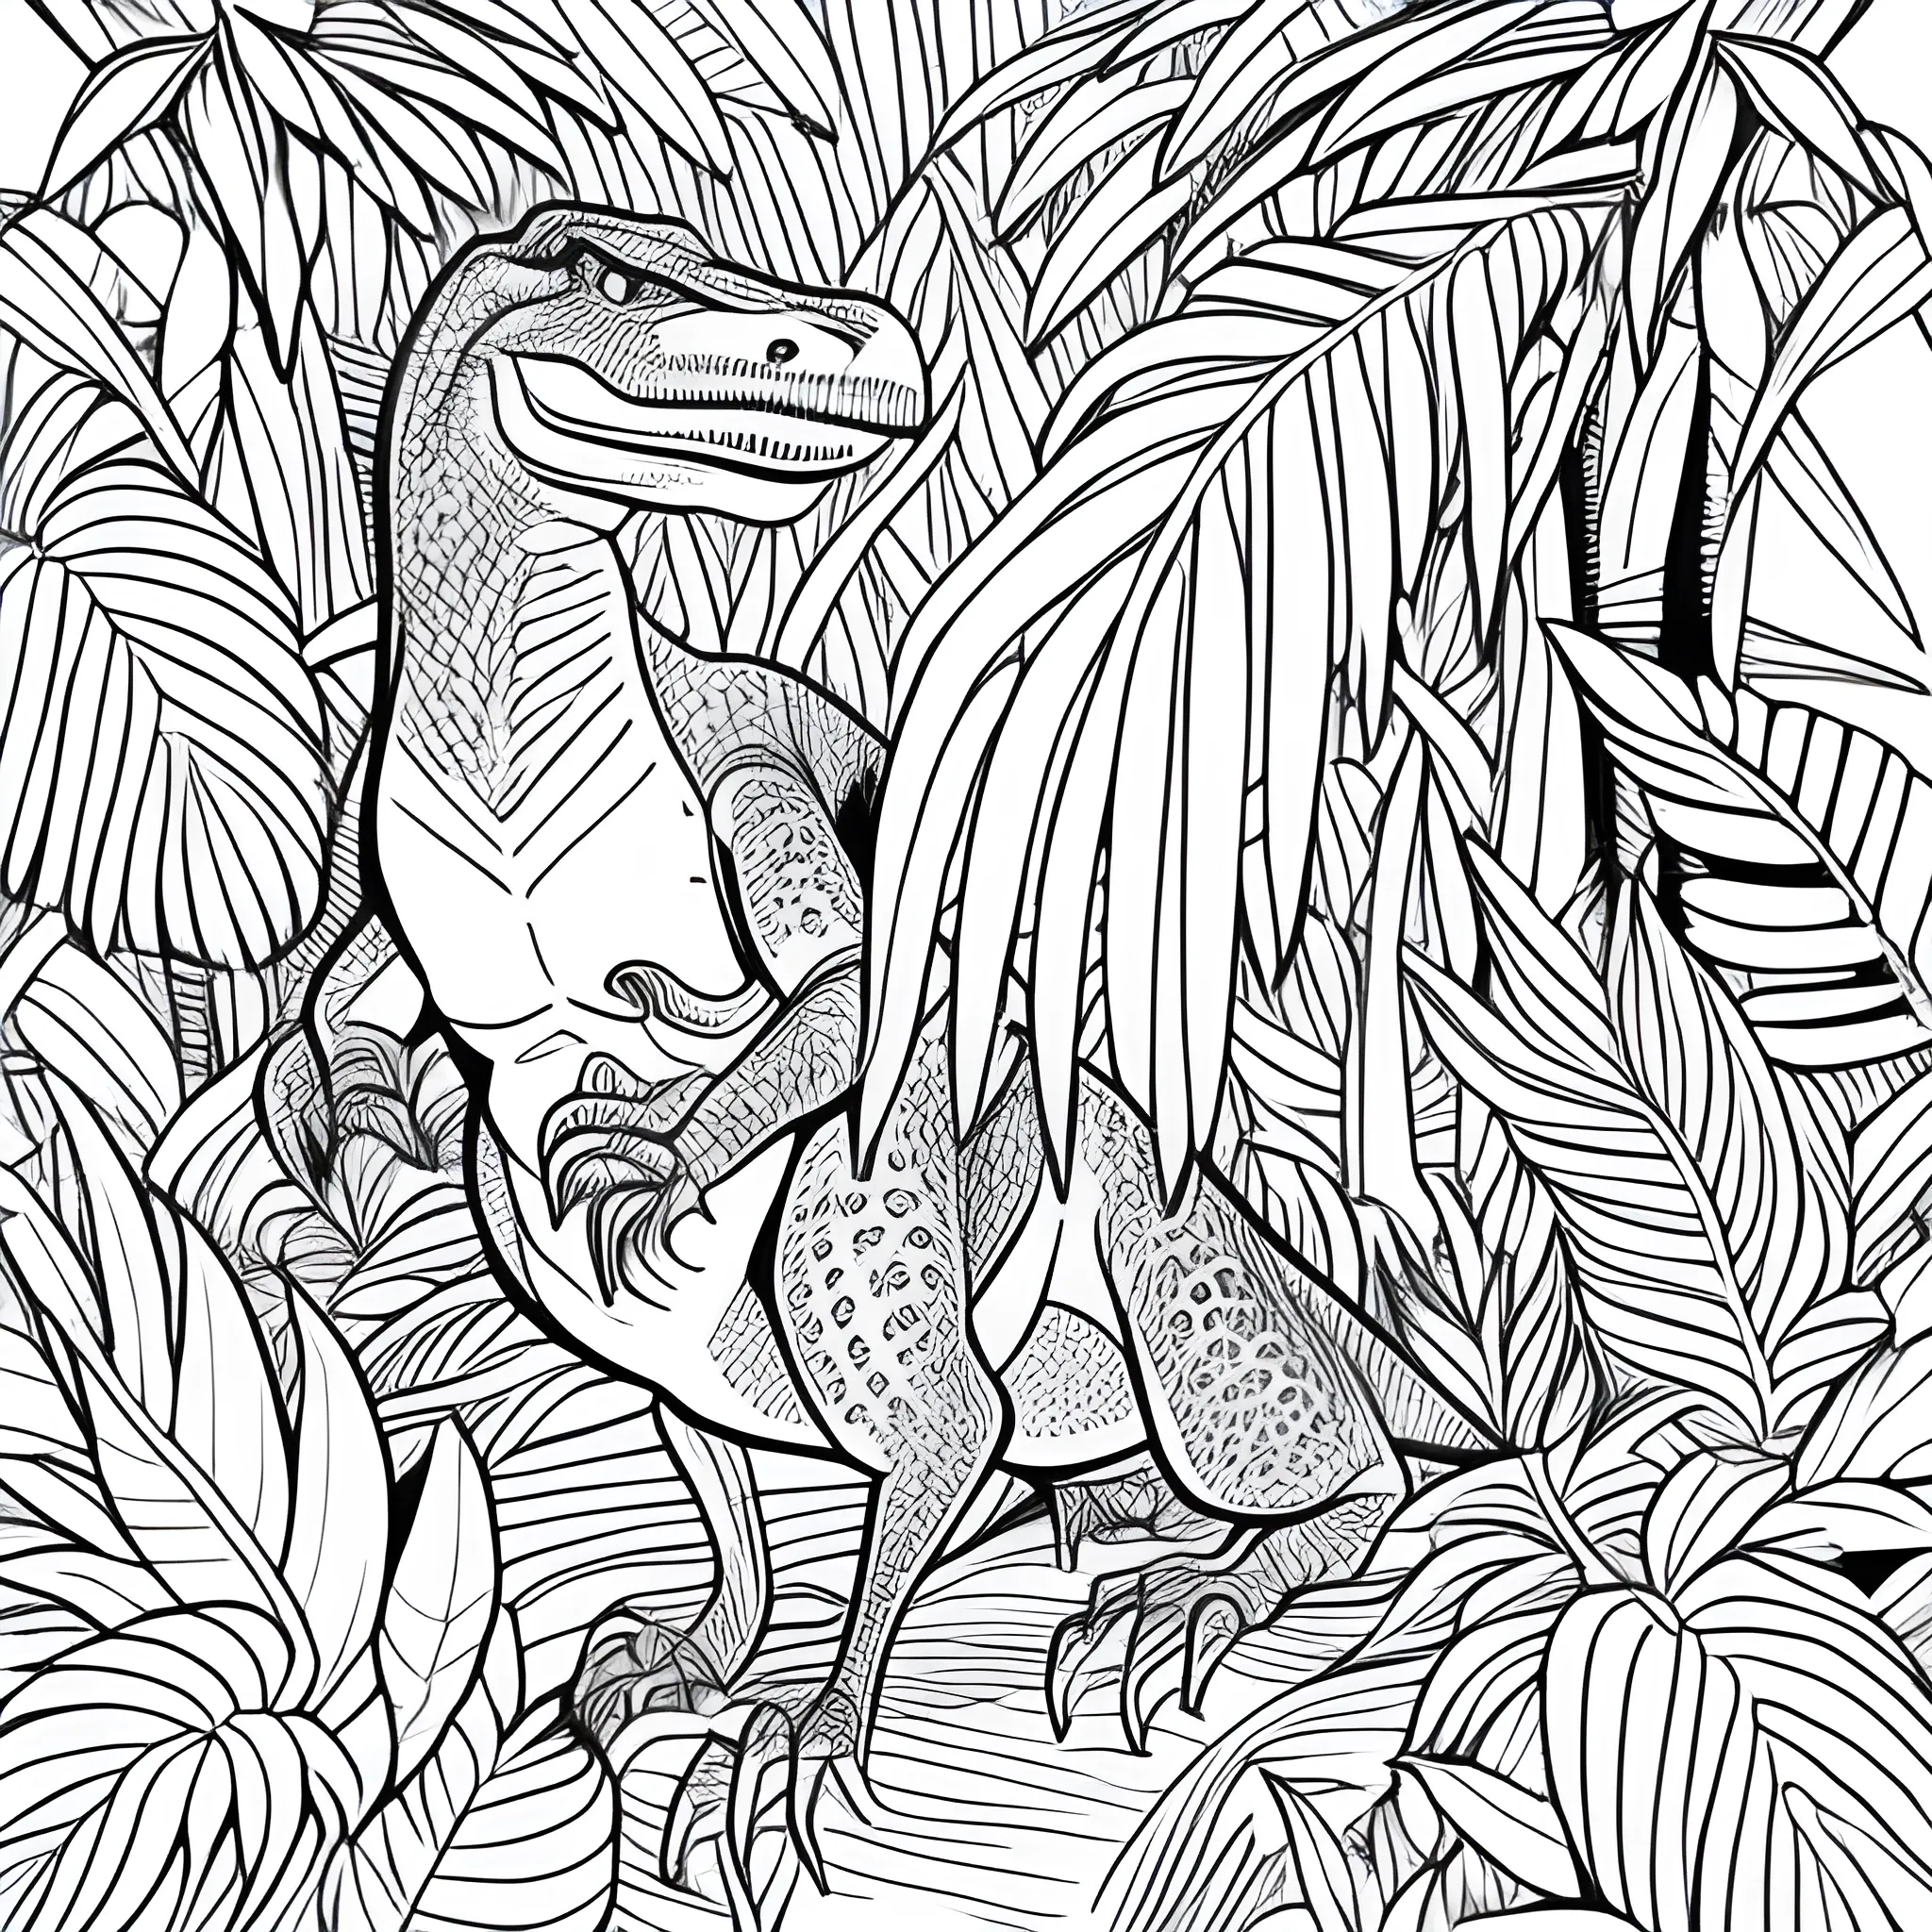 coloring page for kids, dinosaur in a jungle, from the front, cartoon style, thick lines, low detail, no shading, Sketch
monochrome, no distortion, Cartoon